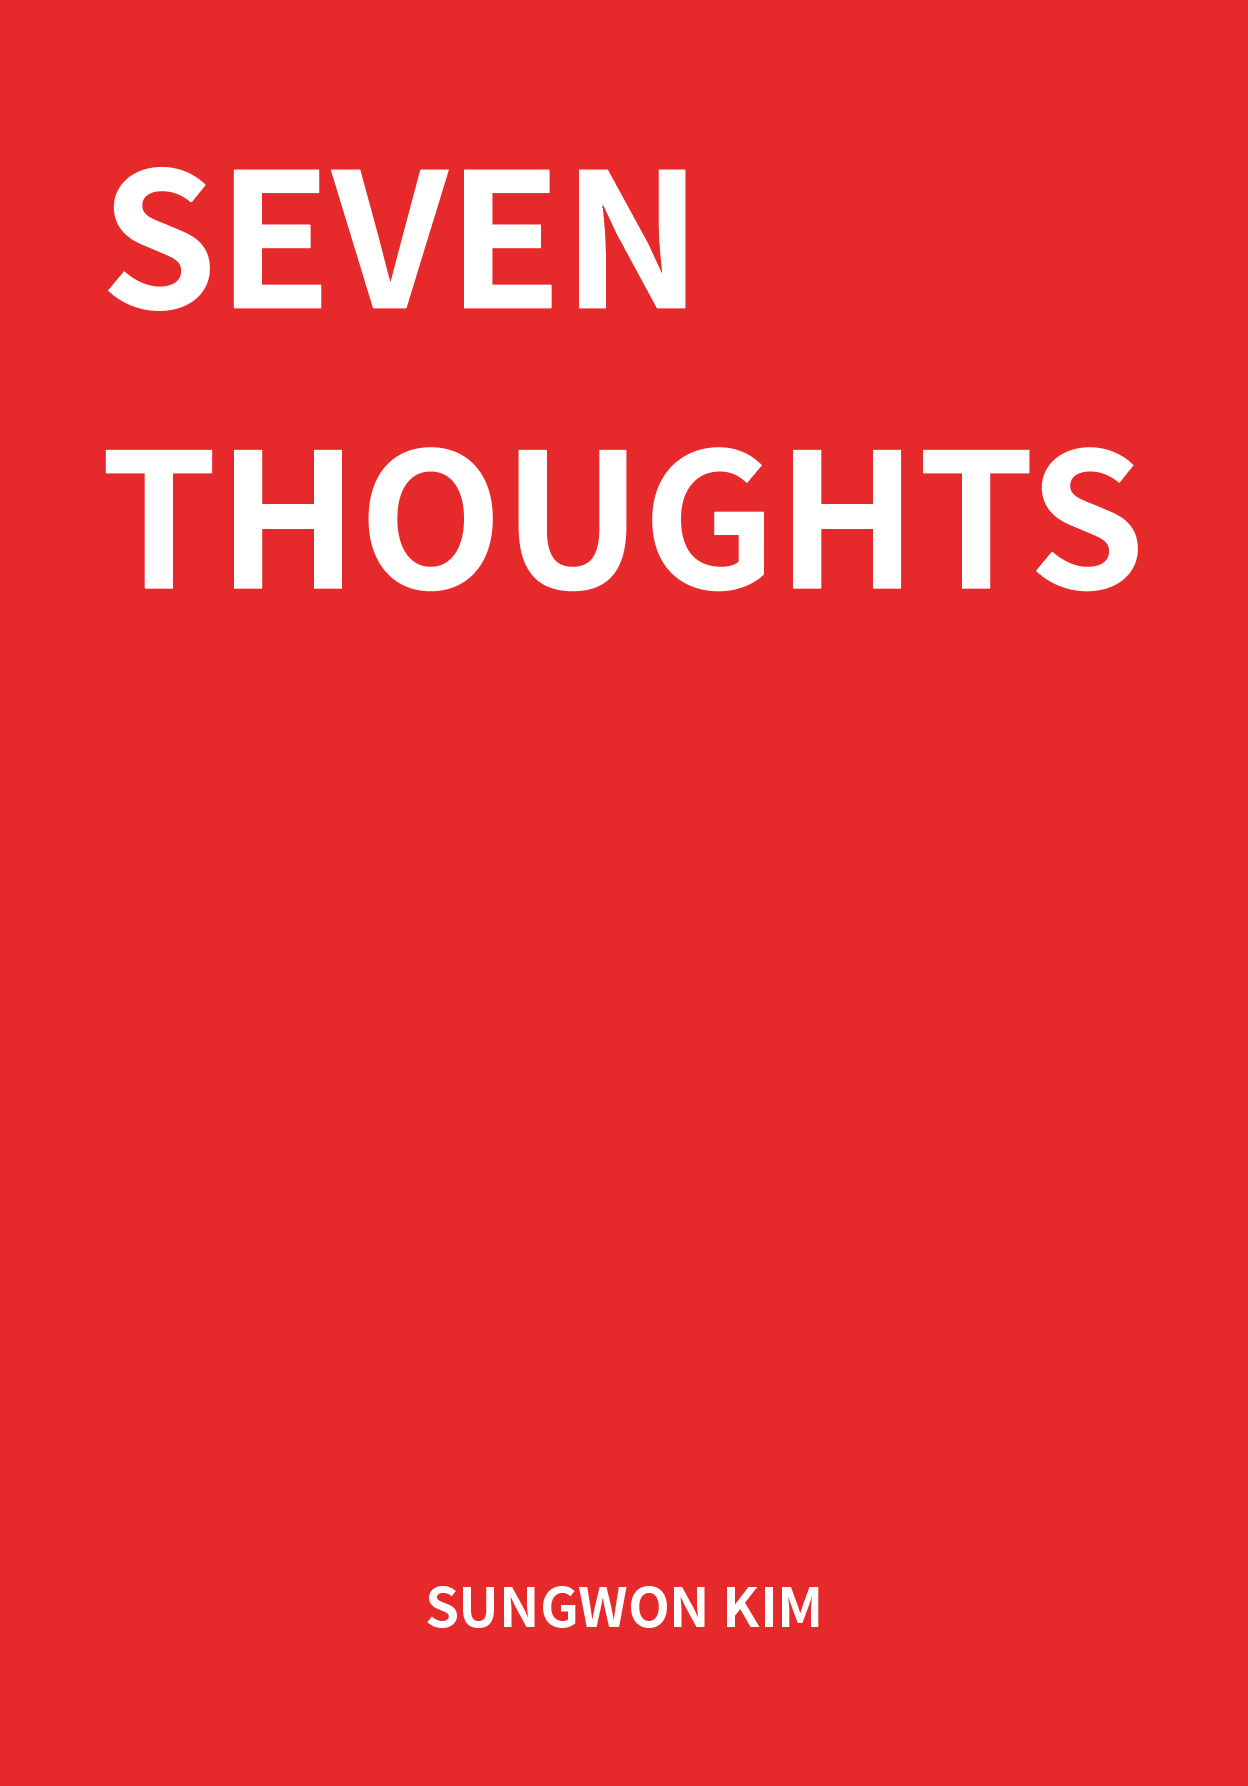 Seven Thoughts by Sungwon Kim - BOOK PROMO - Available at pipermagic.com.au